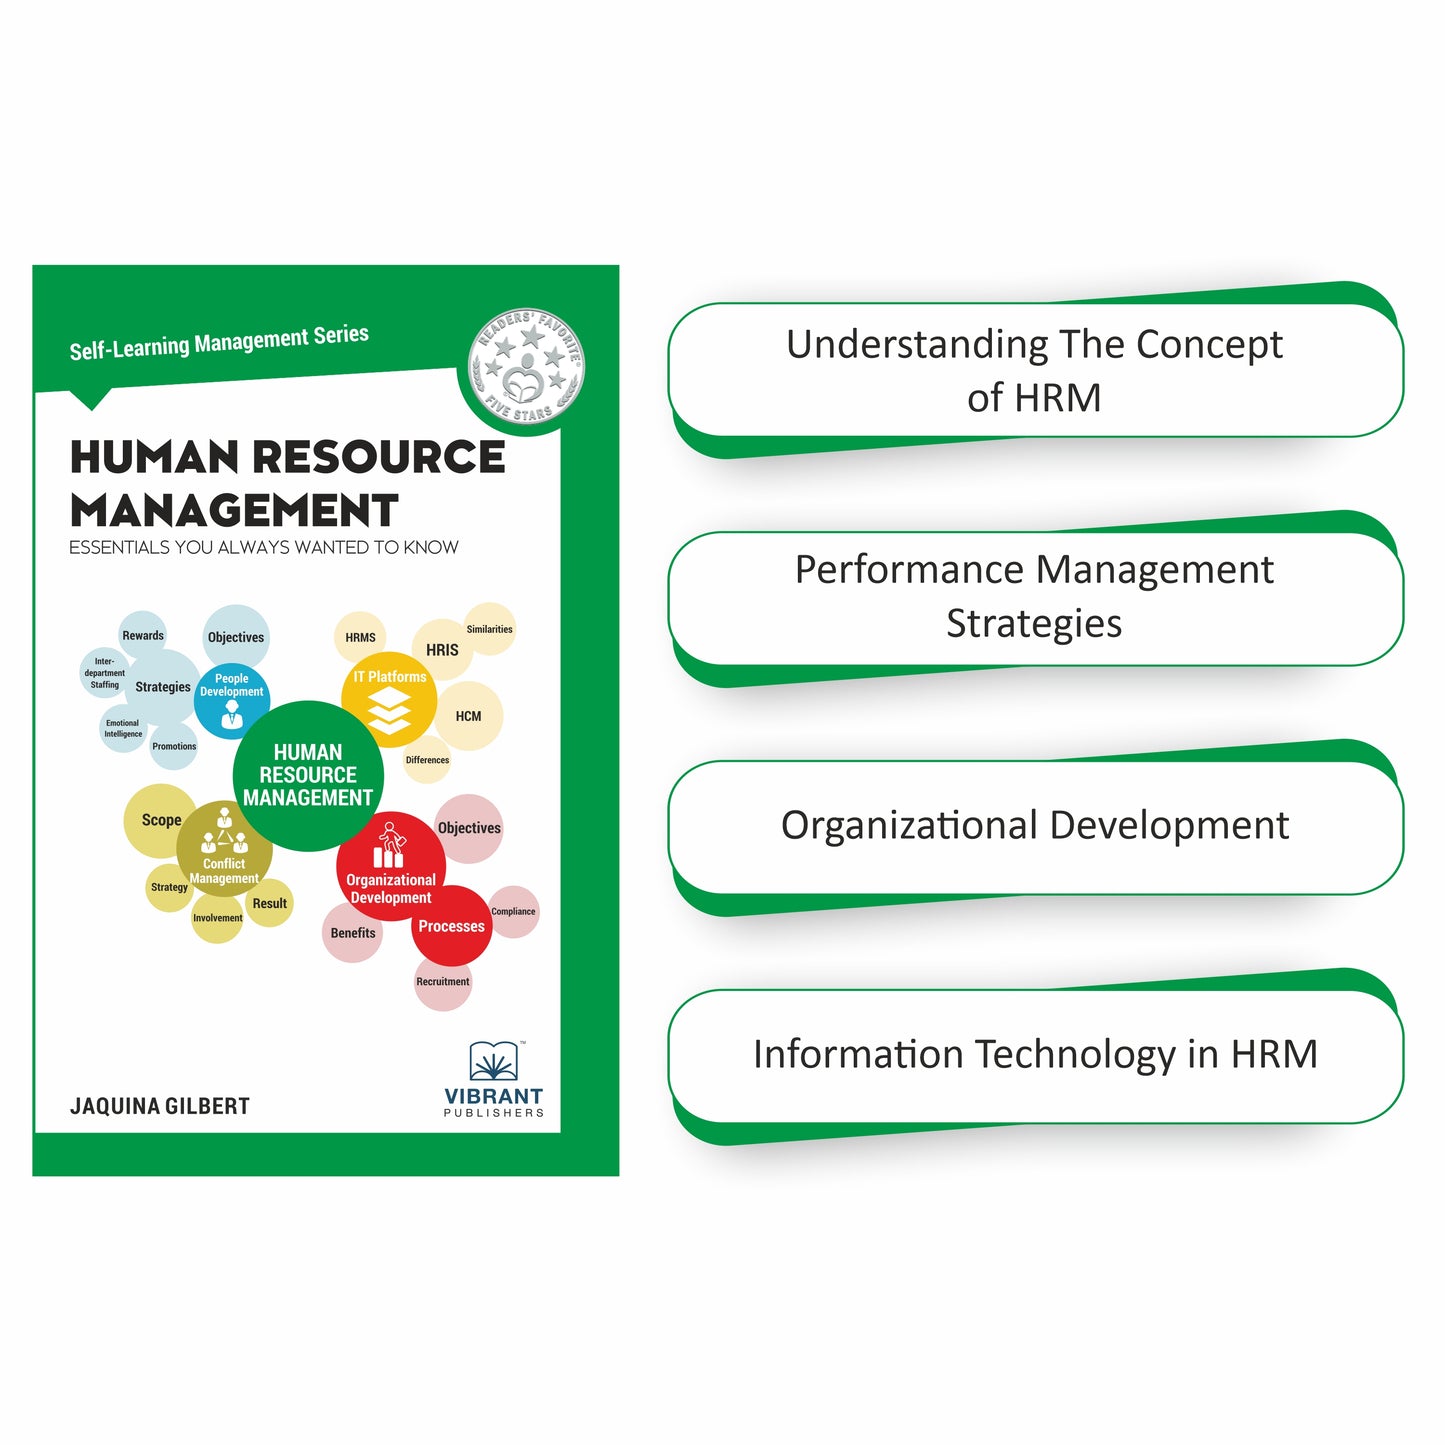 Management Essentials for Working Professionals with focus on Decision Making and People (Human Resource) Management – Includes Practice Exercises, Case Studies, Solved Examples, Real Life Scenarios